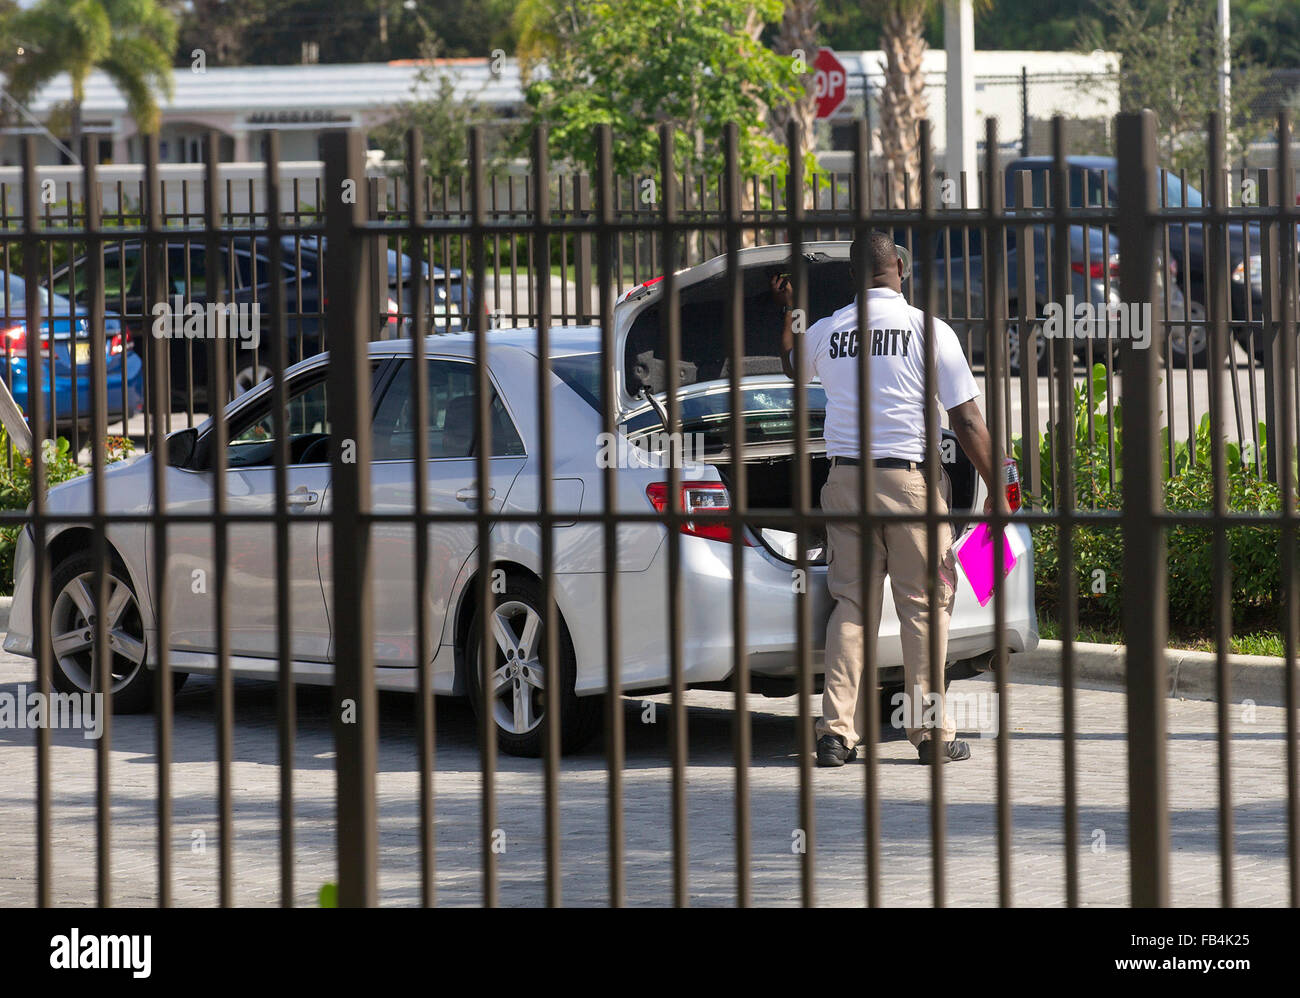 Boca Raton, Florida, USA. 9th Jan, 2016. Security guard posted at the entrance to University Park apartment complex where many Florida Atlantic University students live off campus Saturday January 09, 2016 in Boca Raton. © Bill Ingram/The Palm Beach Post/ZUMA Wire/Alamy Live News Stock Photo